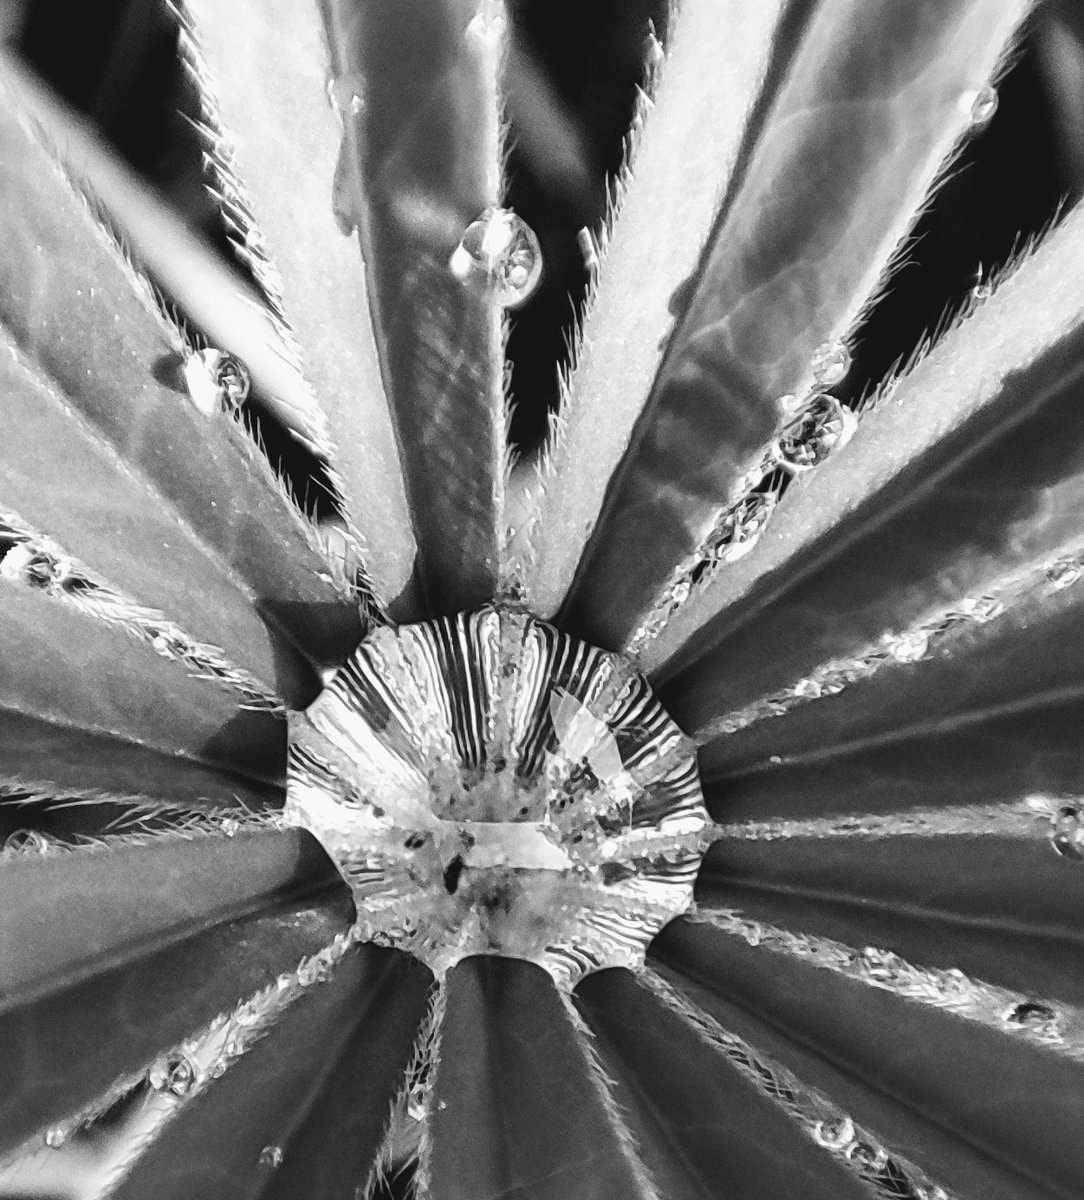 #bnw_macro @BNW_Macro raindrops on the leaf of the Lupin, I wonder where the fine lines in the center drop come from, reflection of some kind 🤔. Enjoy your day ☕🙋🏼